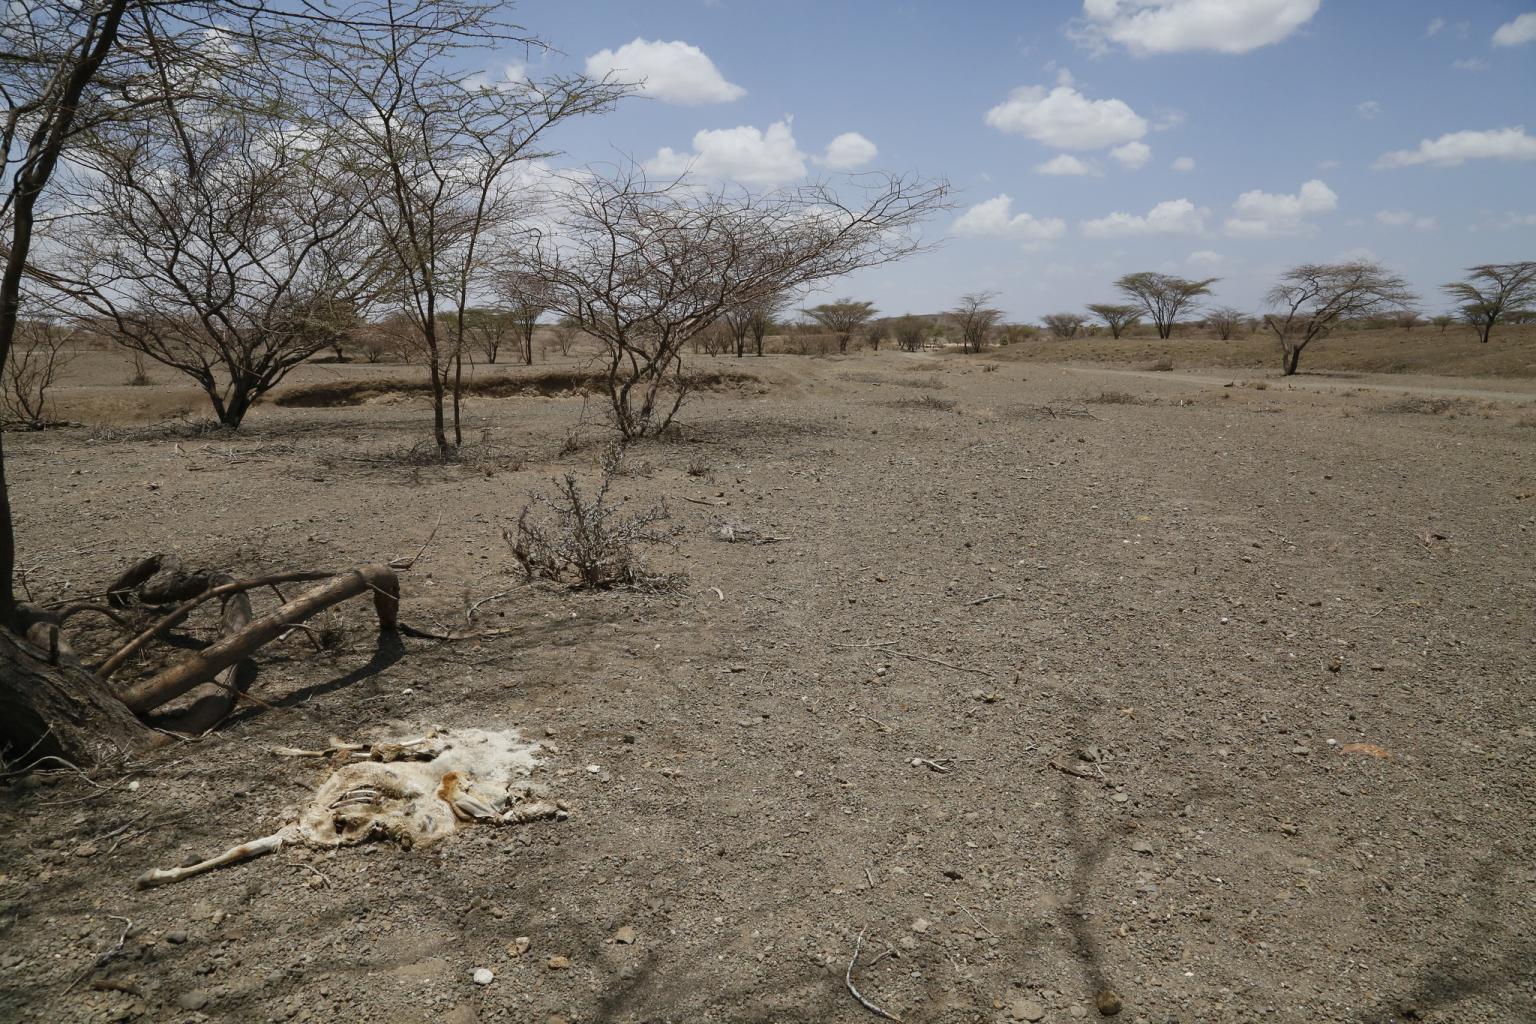 Animal remains on a dry river bed in Kenya